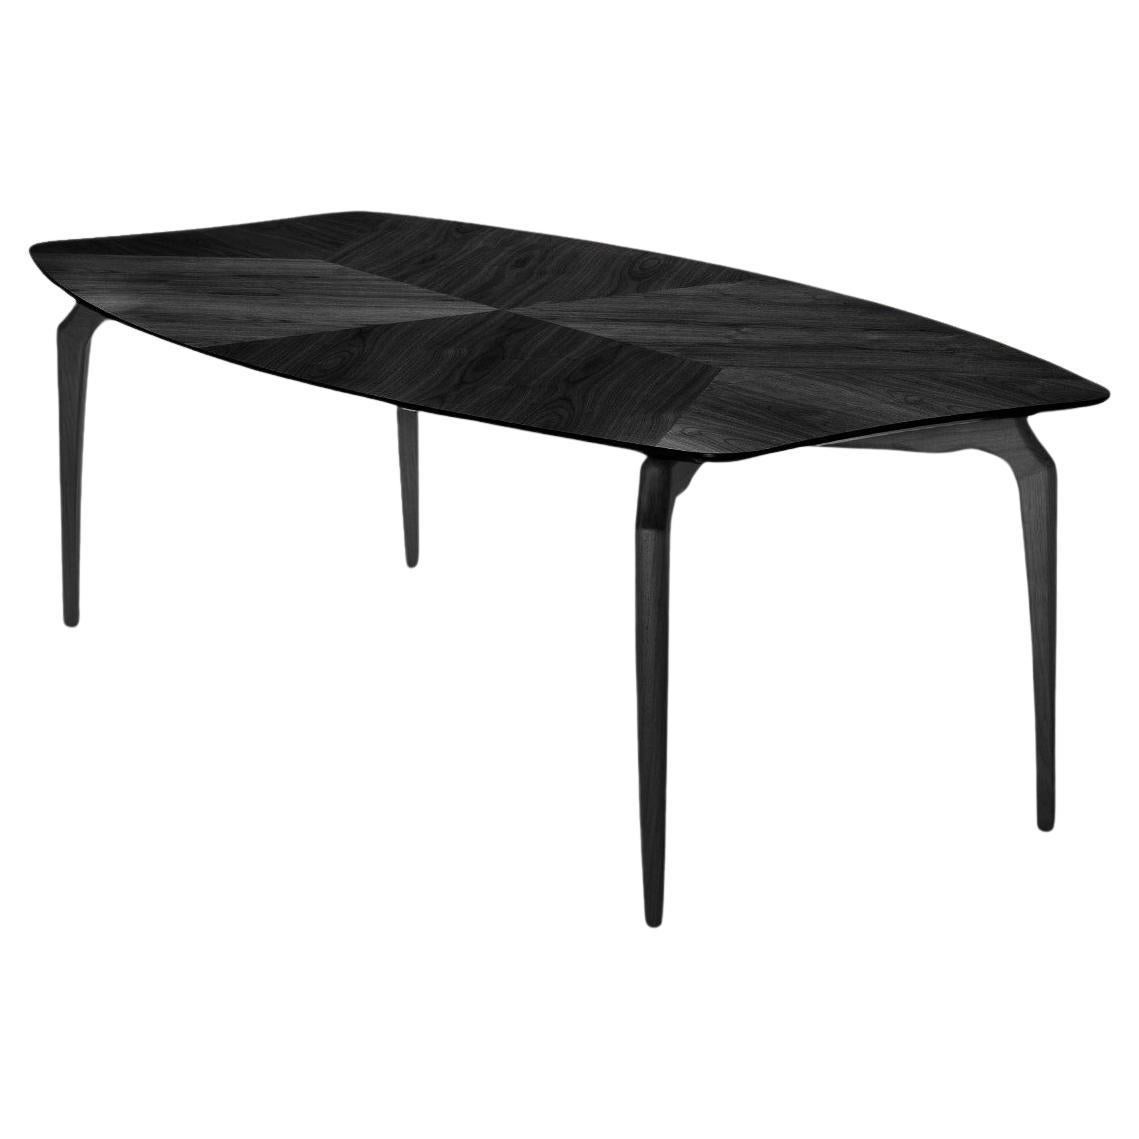 Contemporary "Gaulino" dining table by Oscar Tusquets, black stained ash wood For Sale